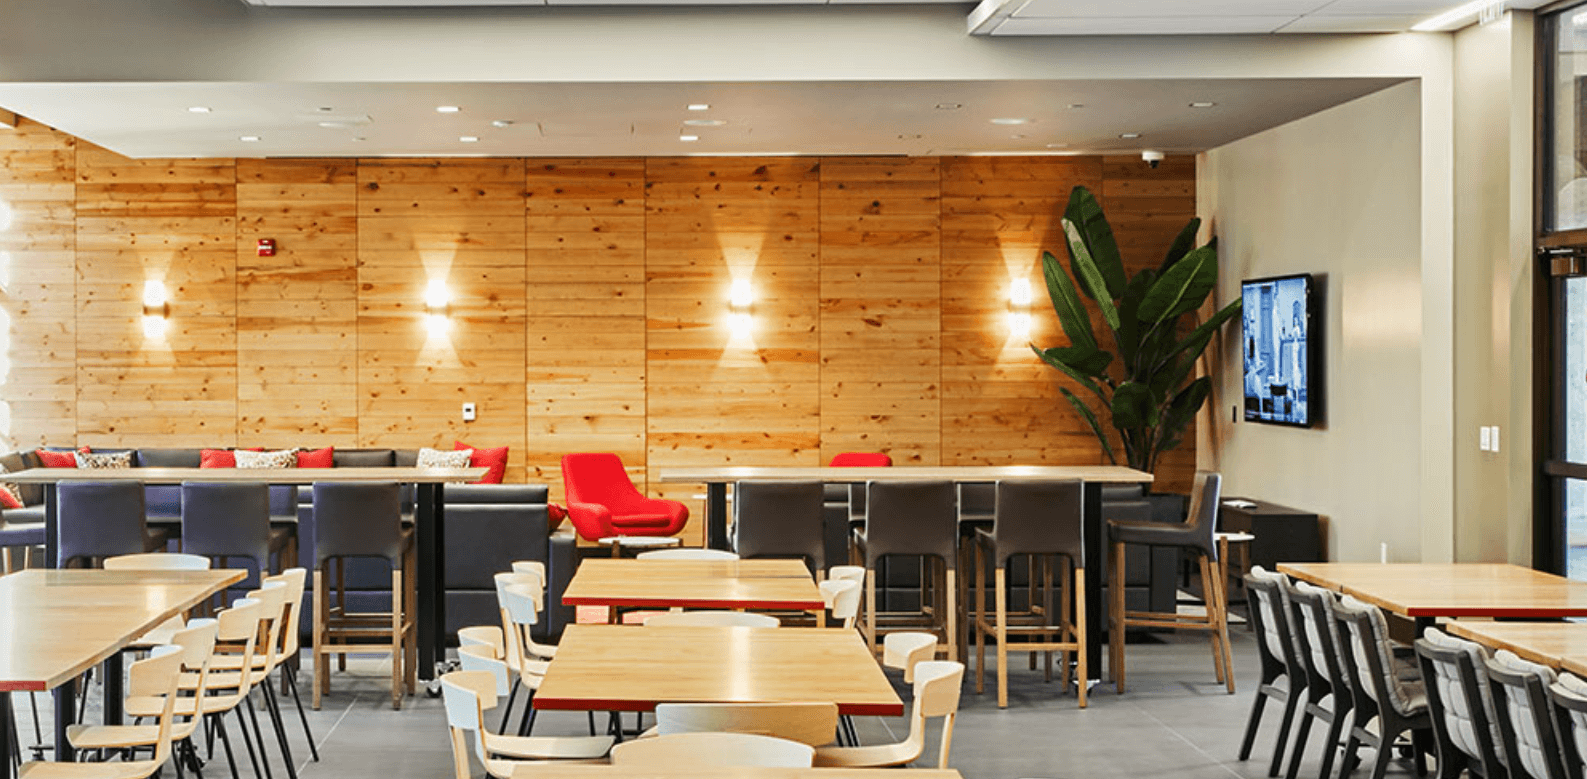 Four wall sconces illuminate an exposed wood wall in a restaurant setting